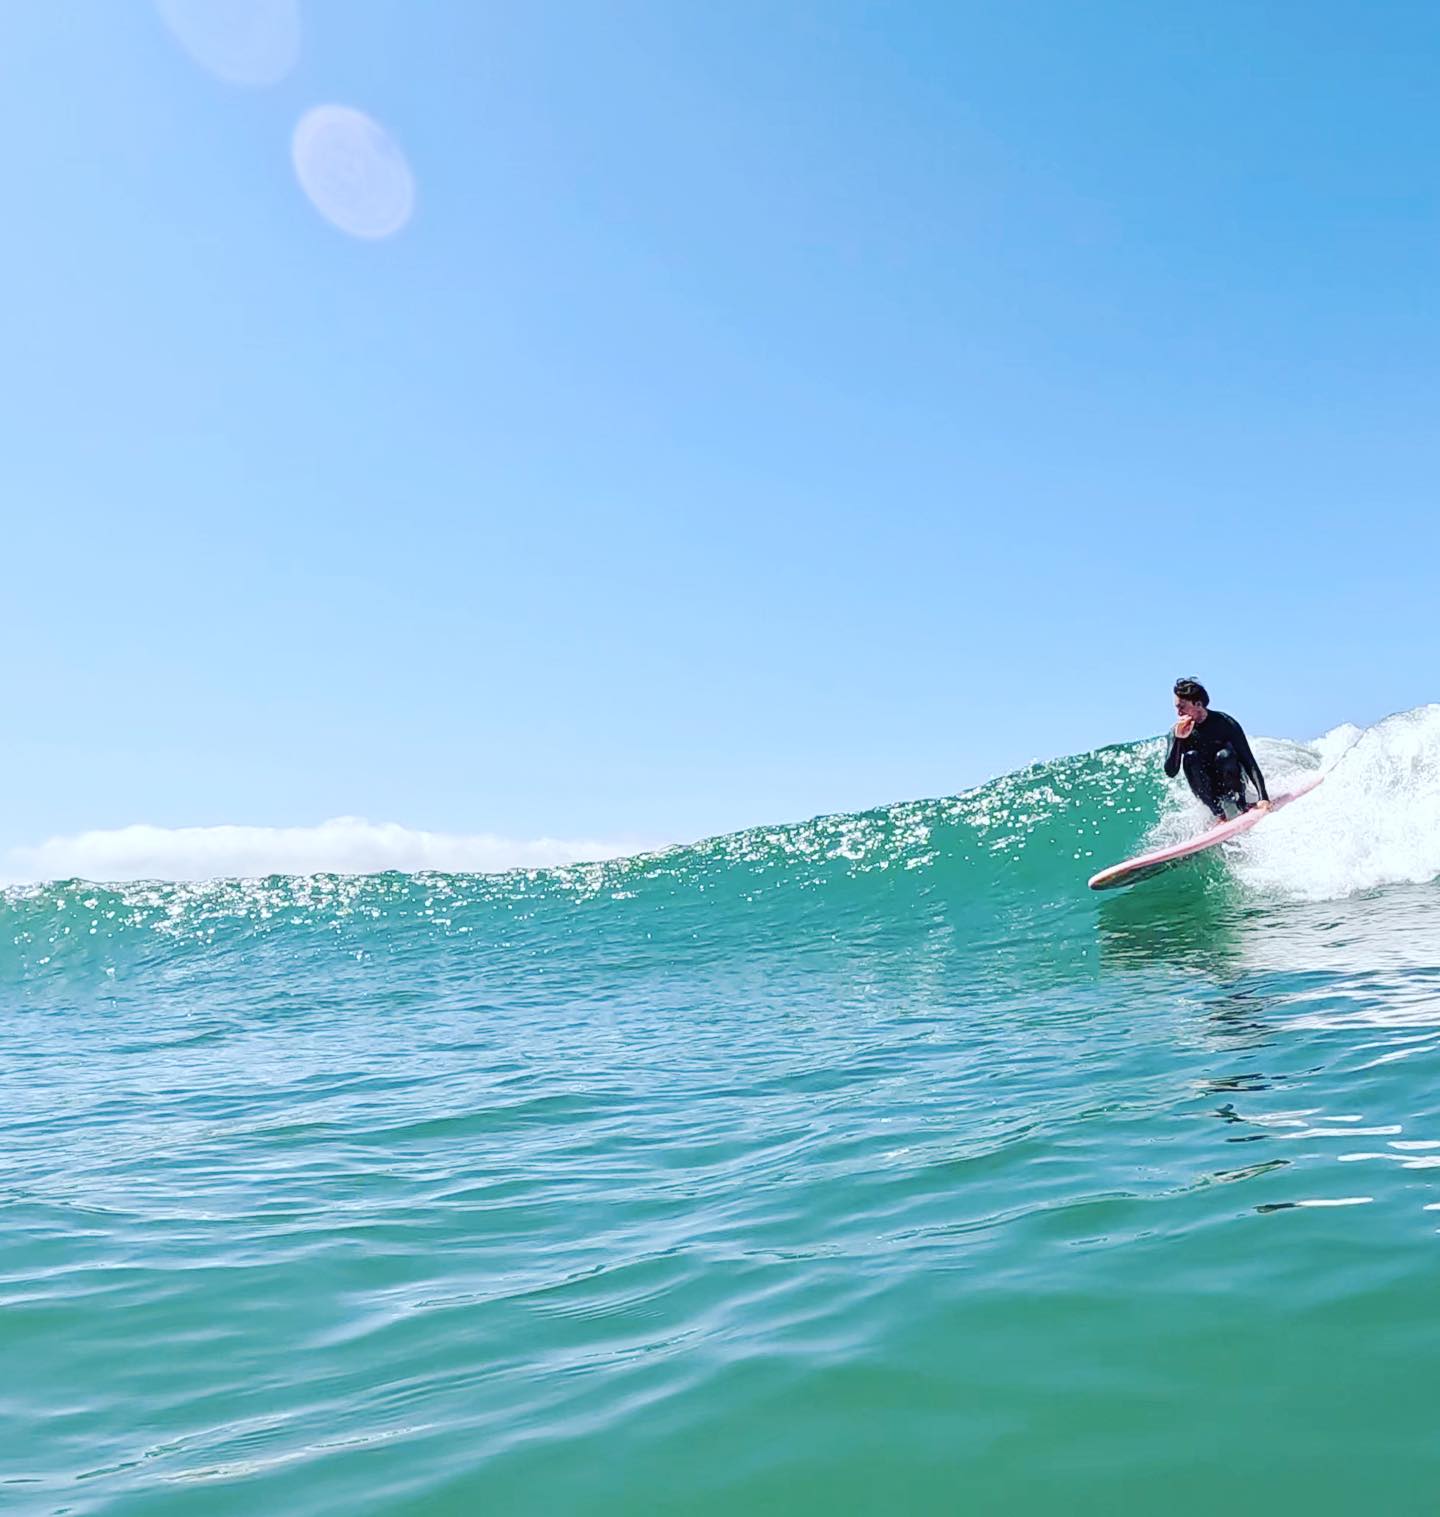 What Are The Best Surf Conditions For Beginners?